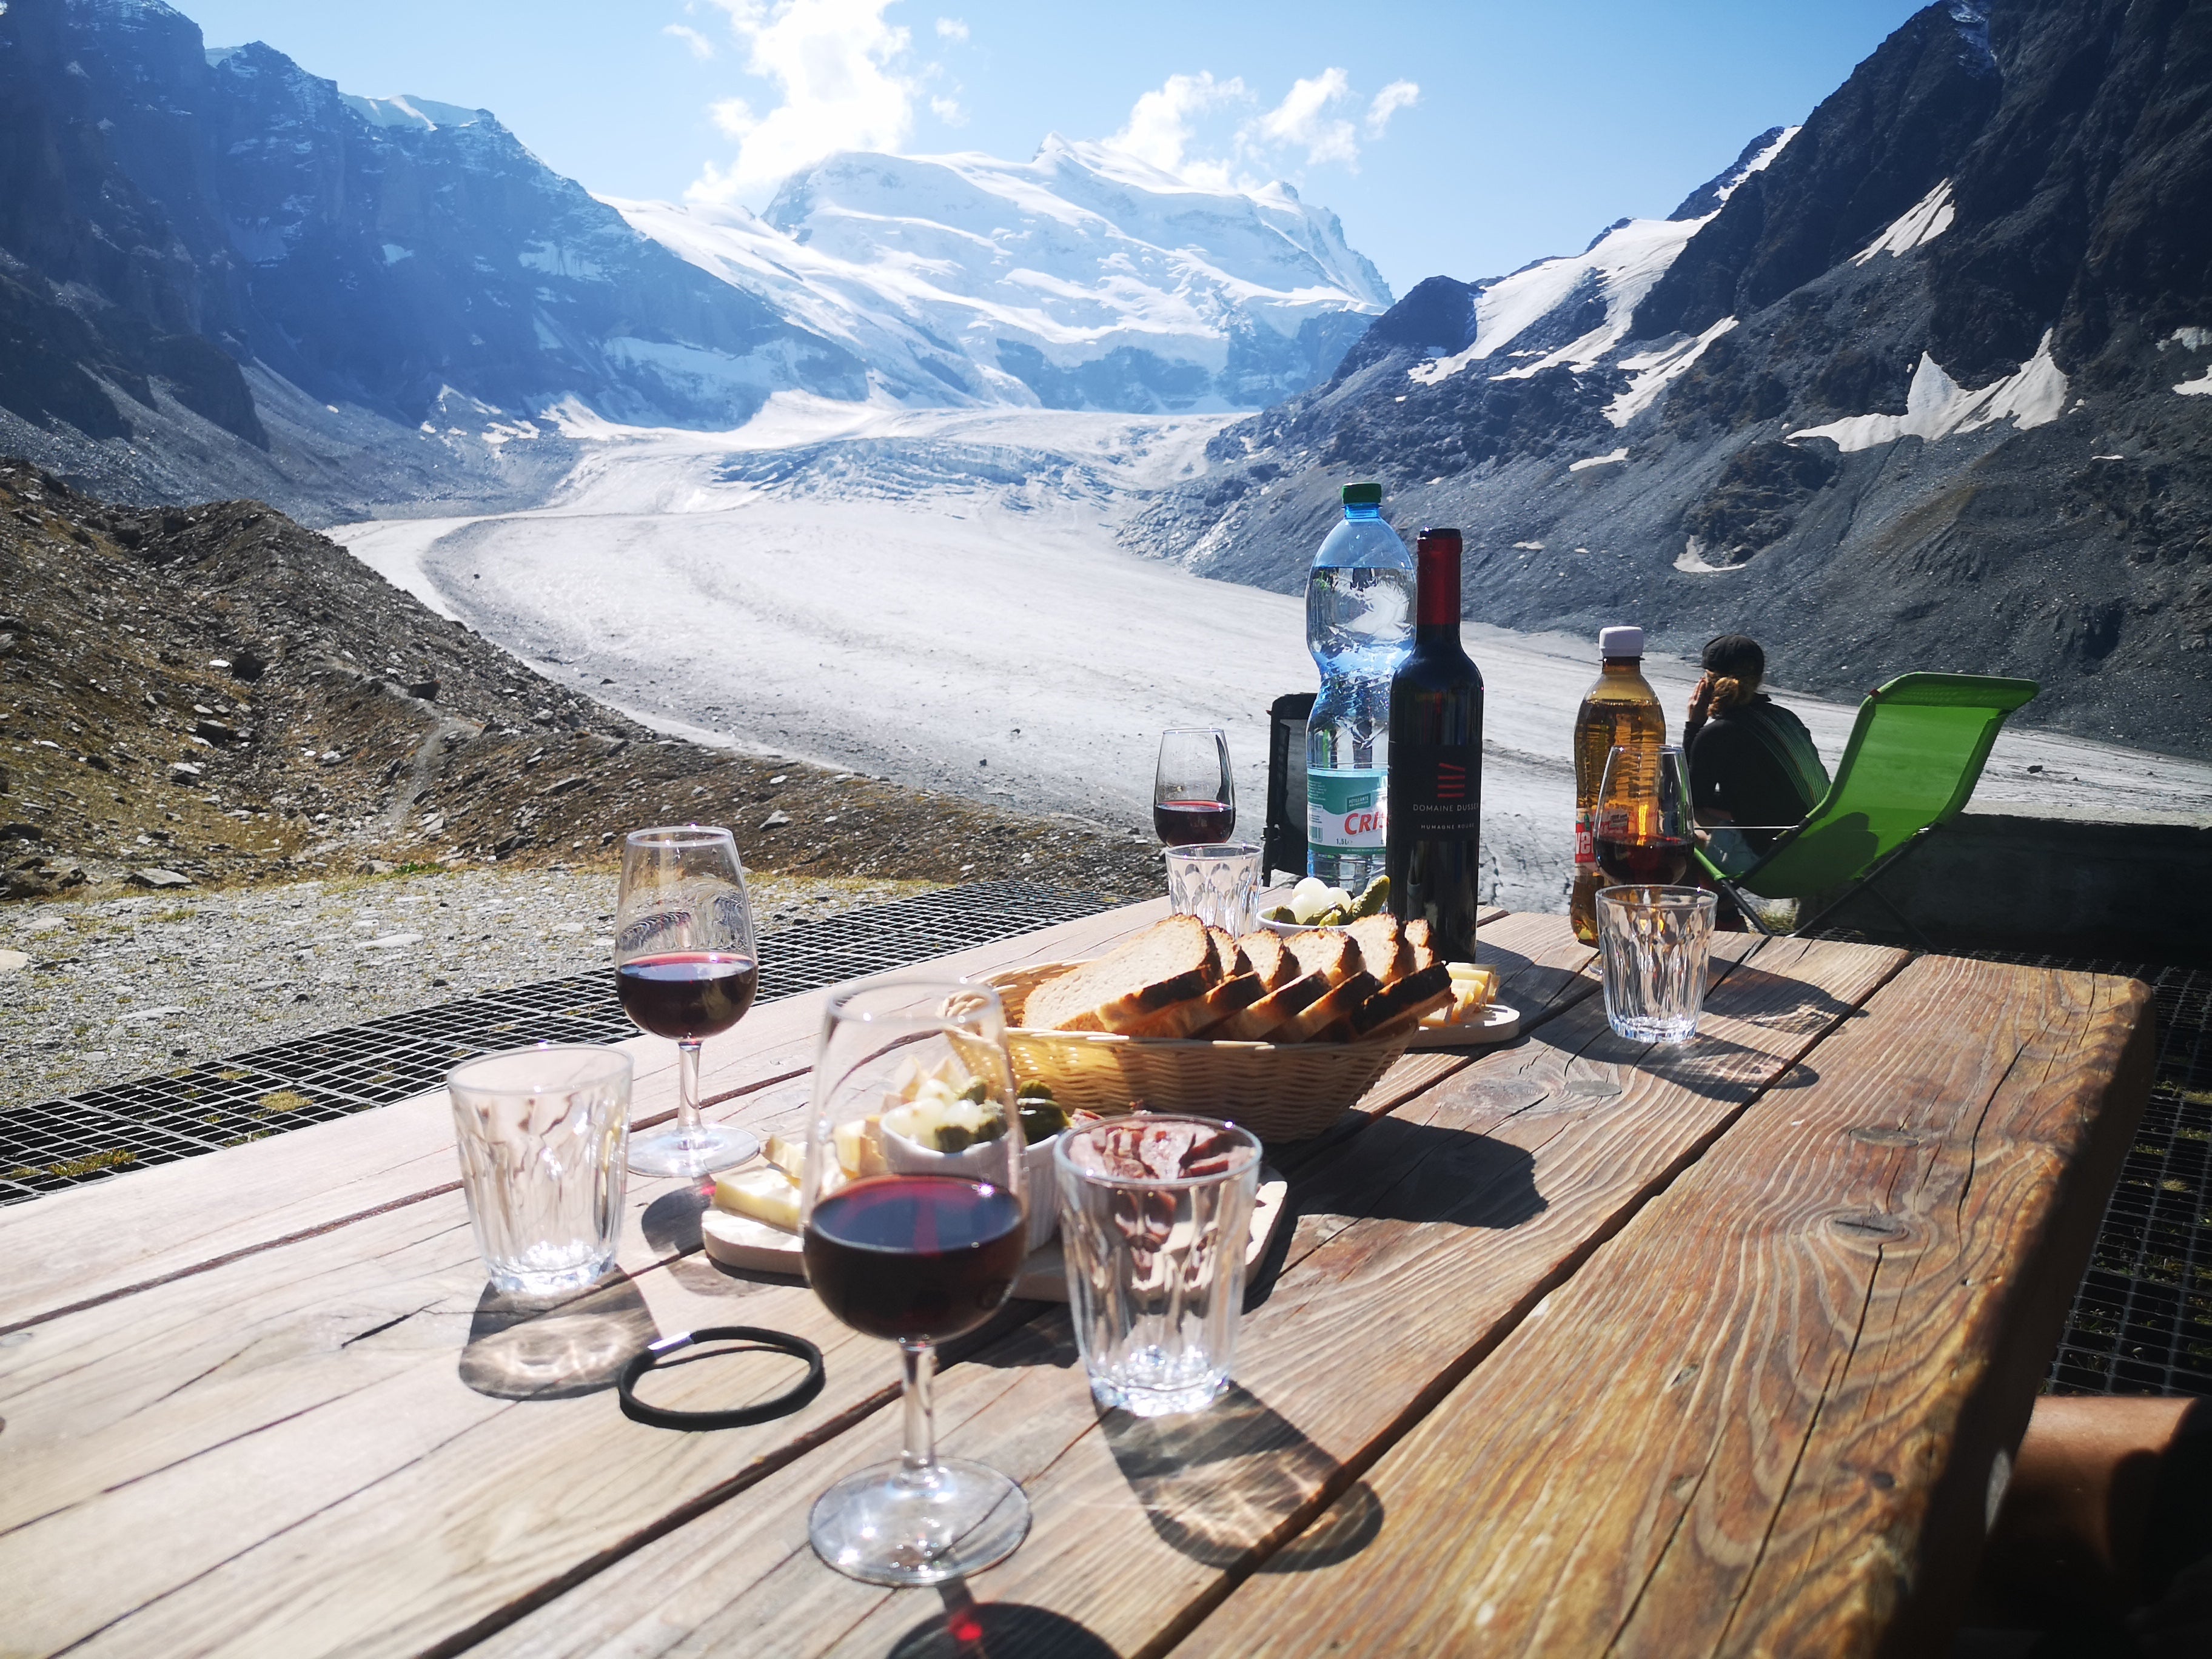 Lunch with a view of the glacier